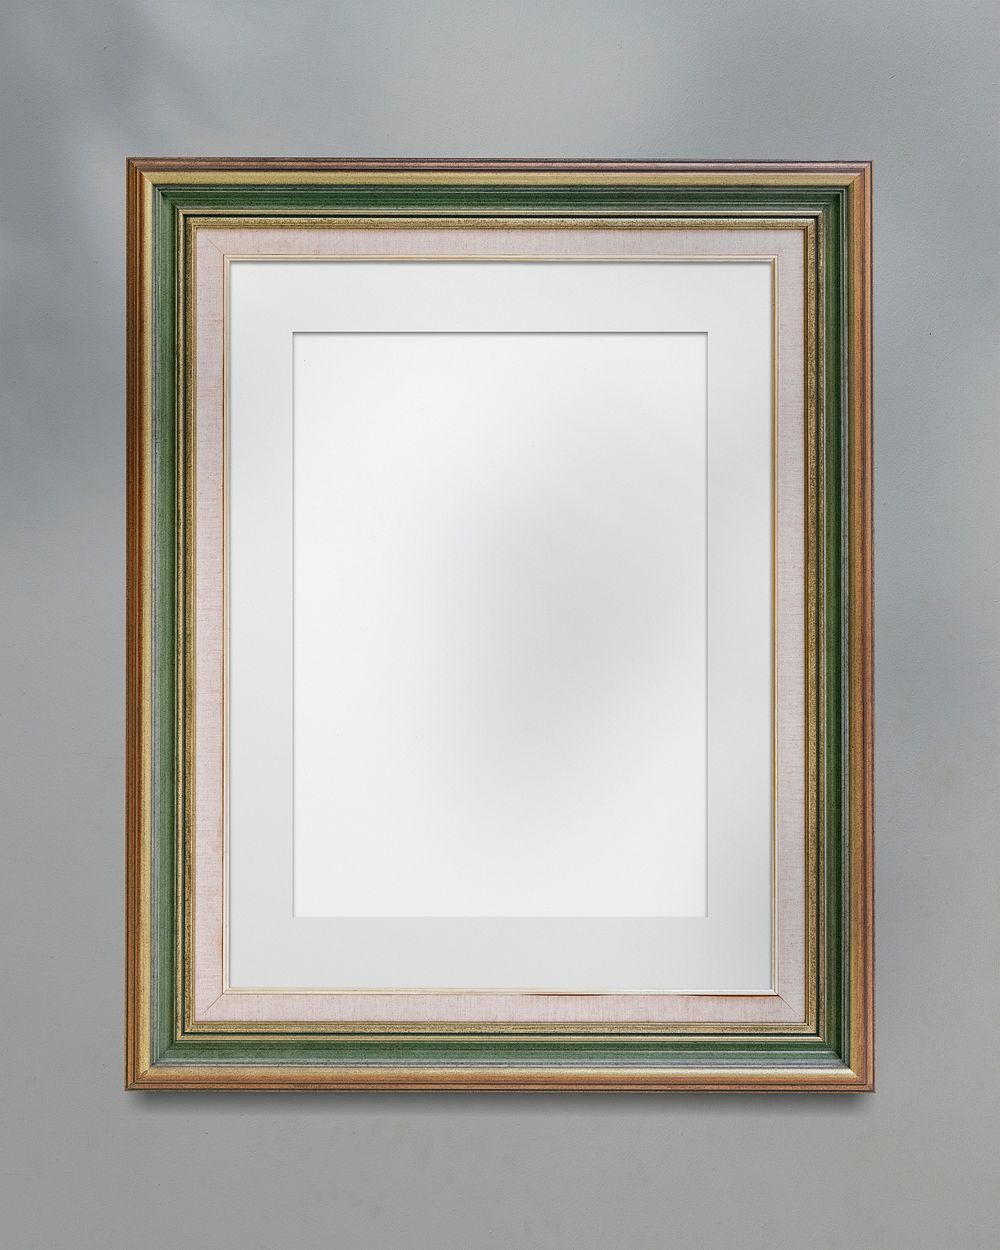 Brown and green picture frame mockup illustration